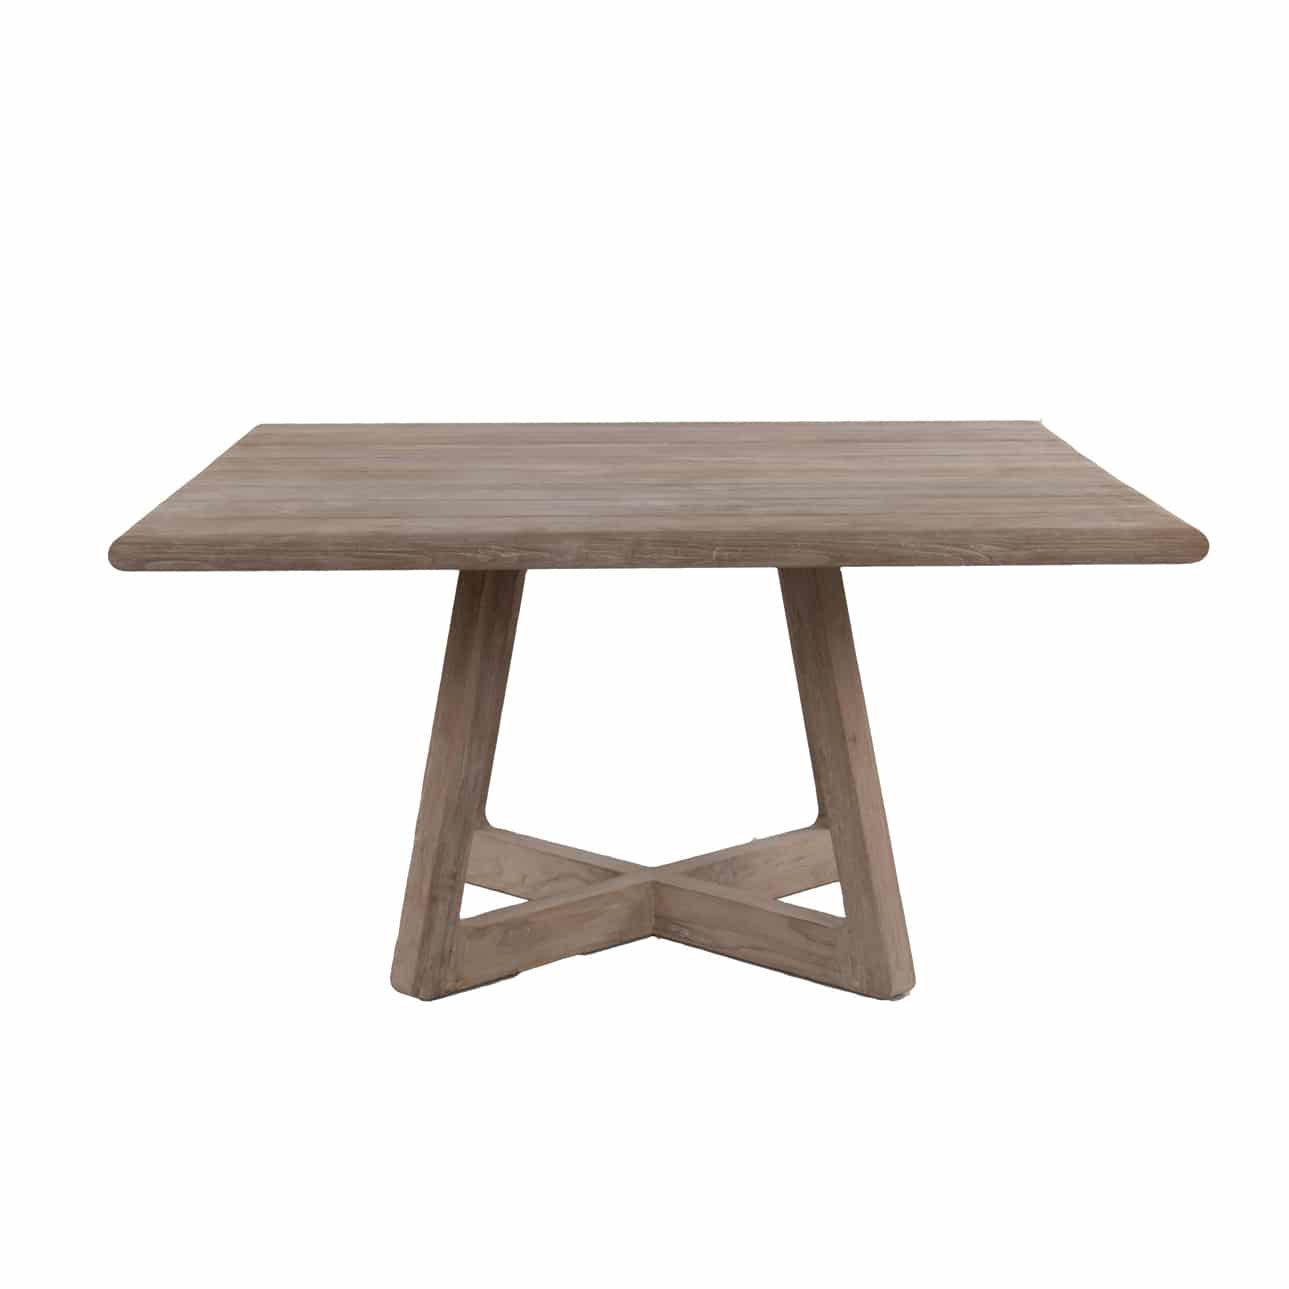 Tyber Reclaimed Teak Square Dining Table